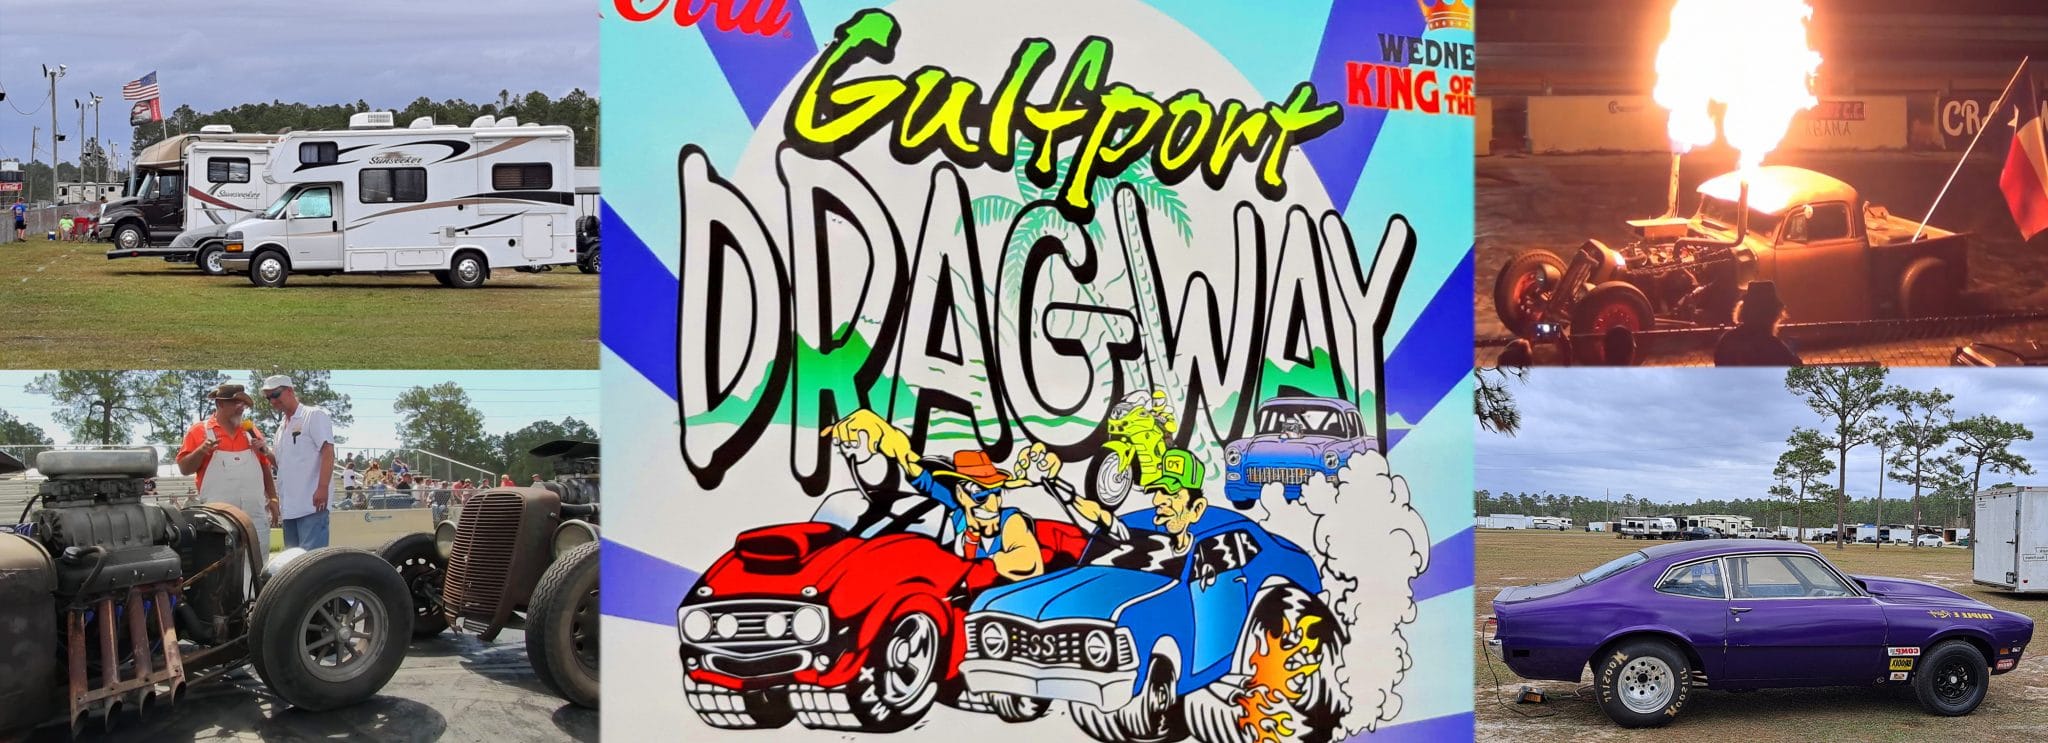 Gulfport Dragway is Revving with Excitement for All Ages Our